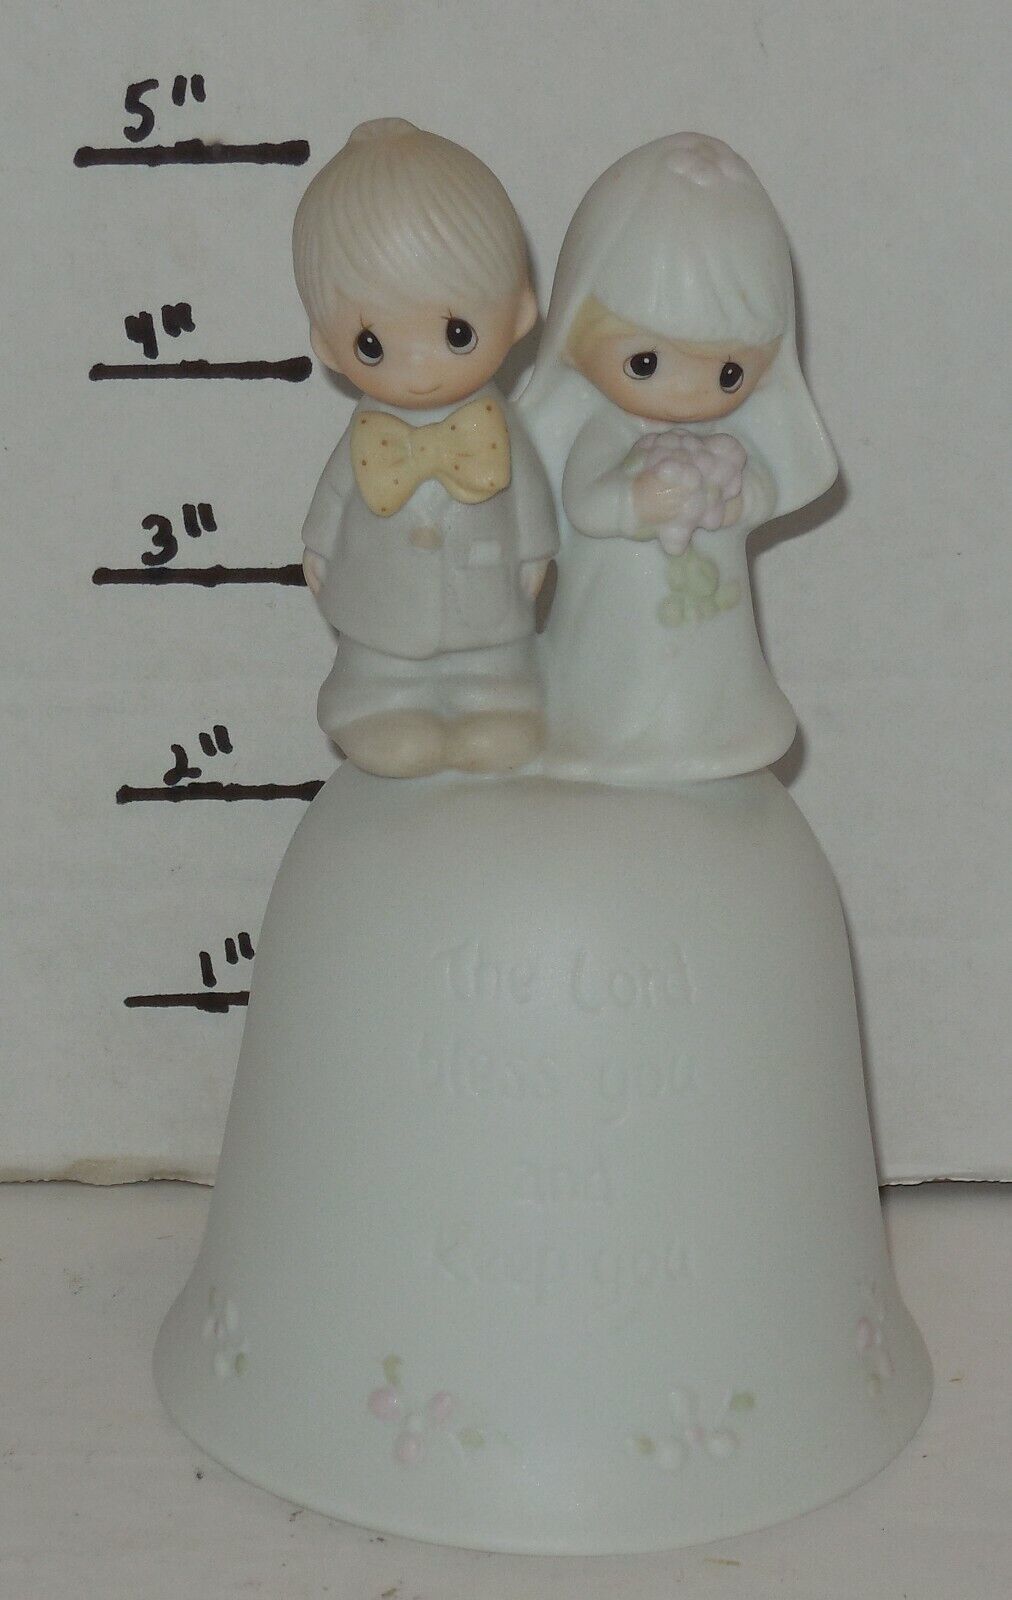 1981 Precious Moments #E-7179 "The Lord Bless You And Keep You" Bell Rare Enesco - $72.42